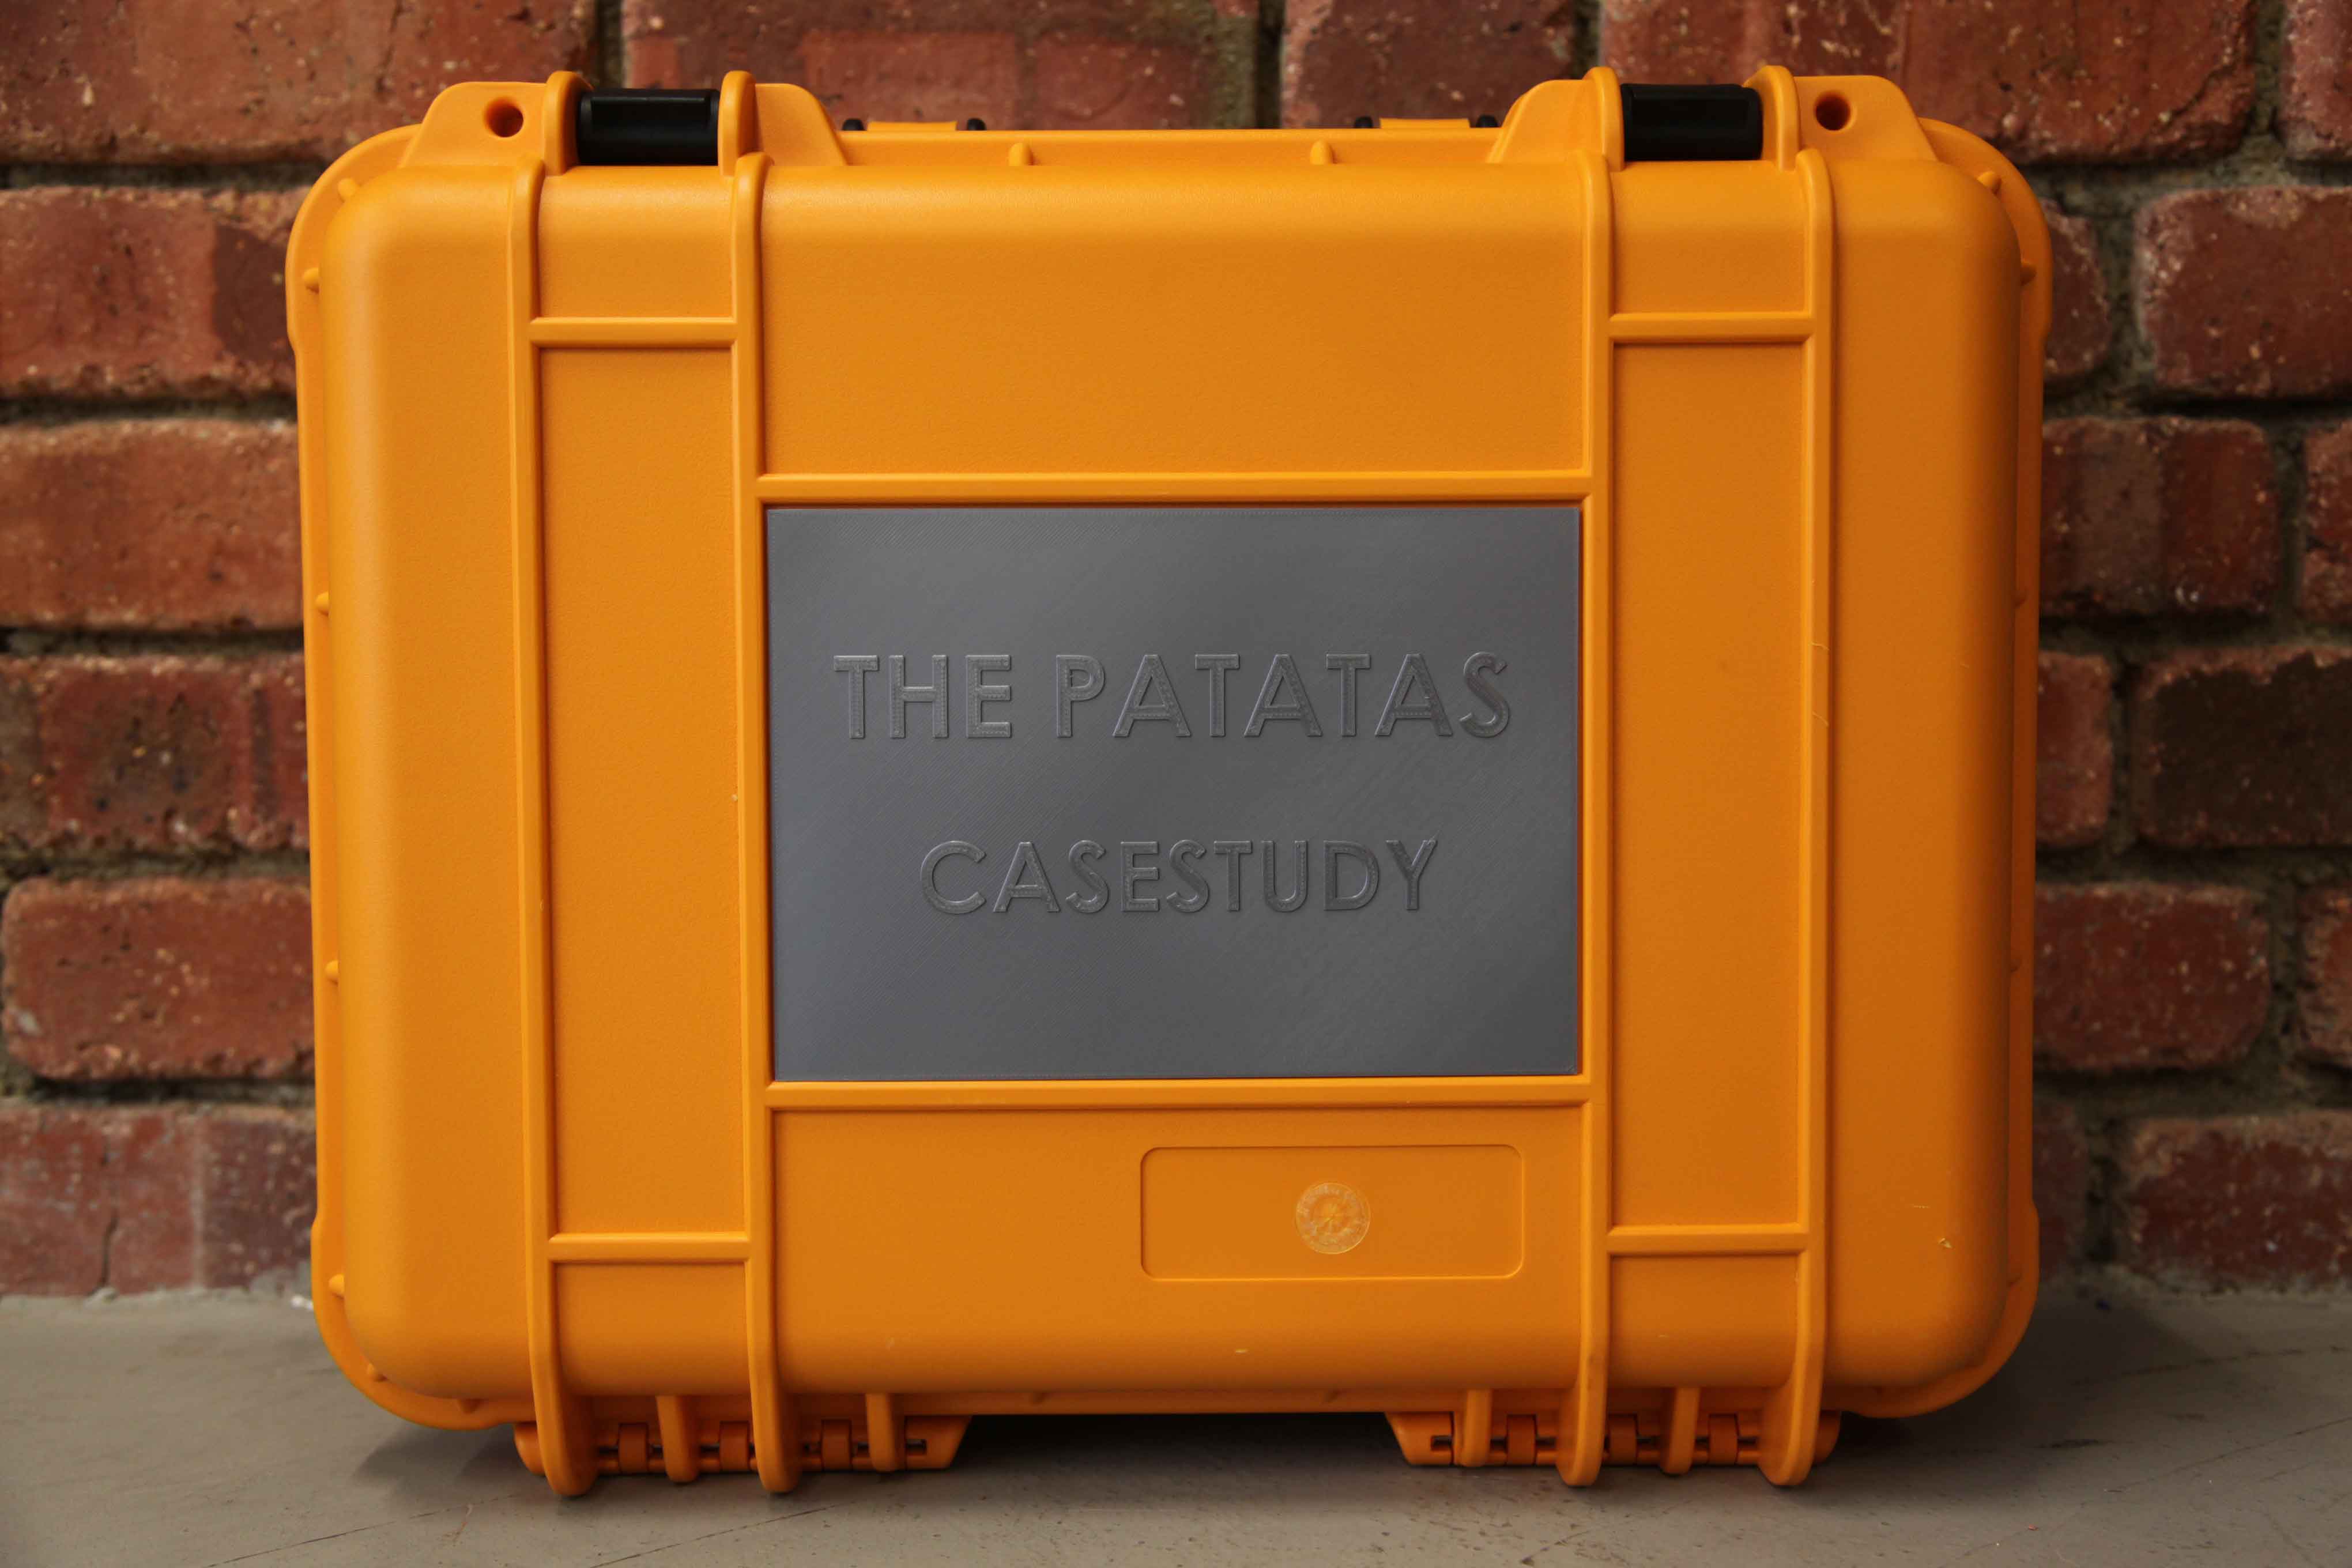 CaseStudy in yellow briefcase